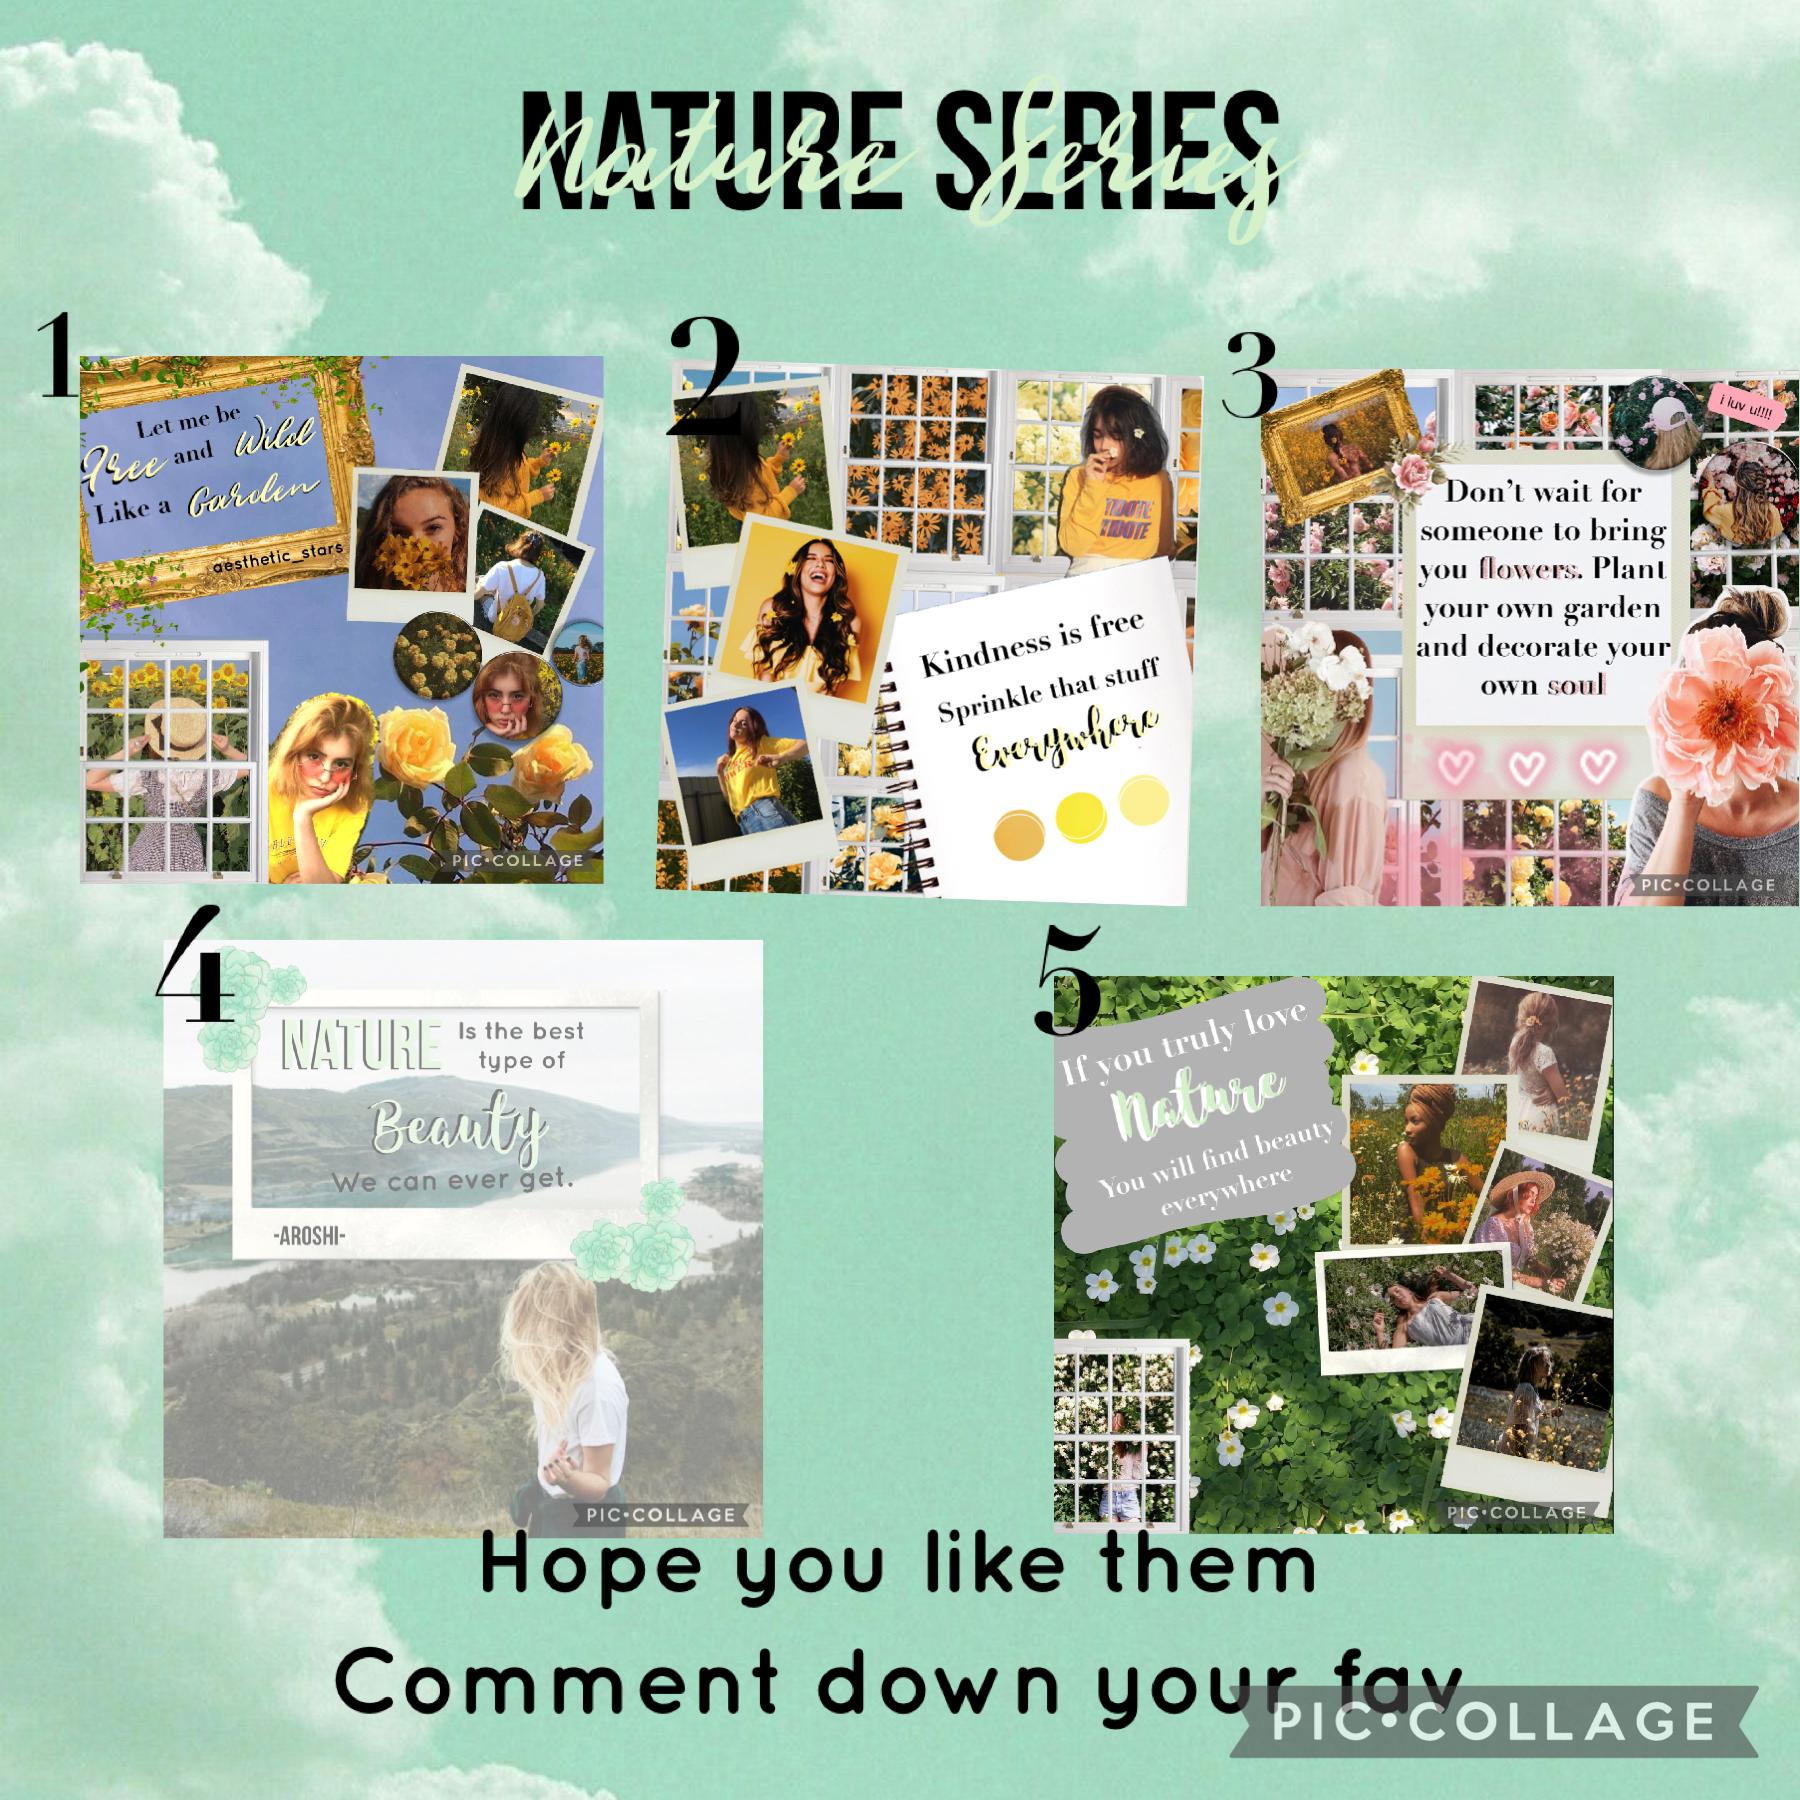 💚 9 March 2021 💚
Nature Series!! Hope you liked them.
Qotd Which is your fav in the nature series?
Aotd All of them!!